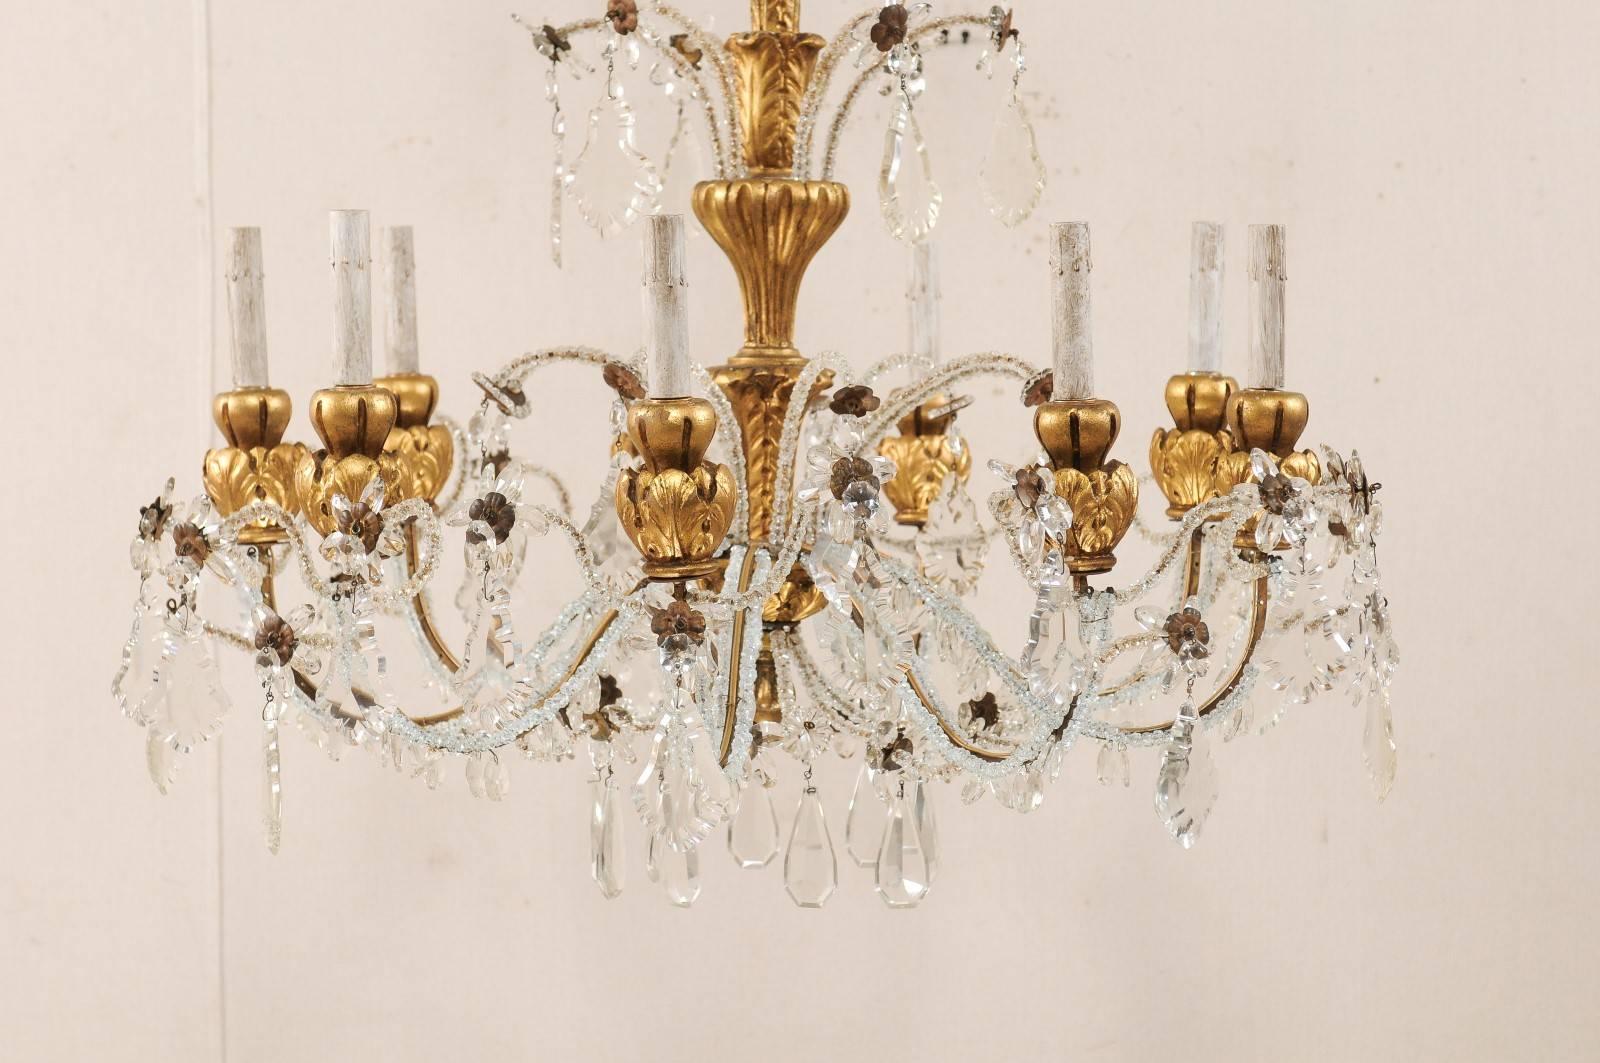 Beaded Exquisite Italian Vintage Gilded and Carved Wood Multi-Tiered Crystal Chandelier